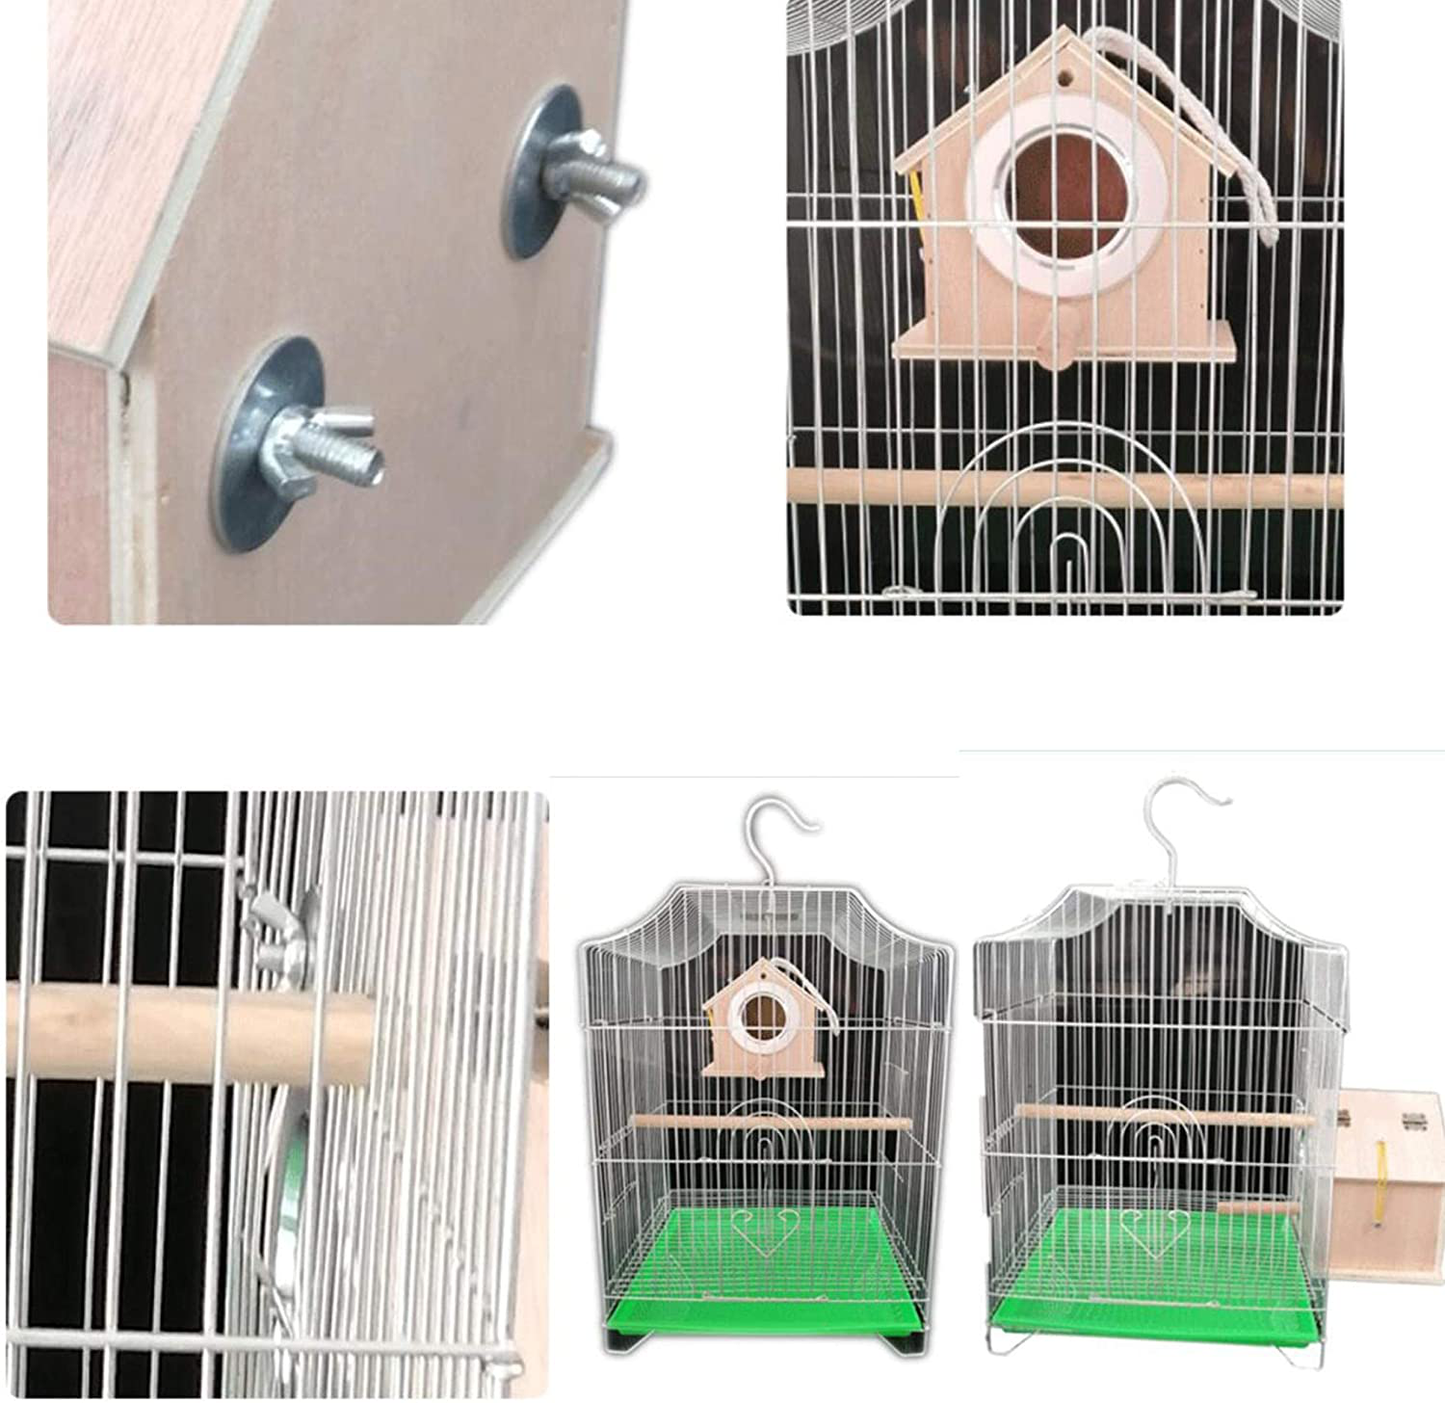 Alfyng Parakeet Nest Warm Box, Bird Breeding Box, Parrot Wood House Nesting Box, Parrotlets Budgie Mating Box, Aviary Cage Box for Lovebirds, Cockatiel, with Birds Stand Perch Animals & Pet Supplies > Pet Supplies > Bird Supplies > Bird Cages & Stands alfyng   